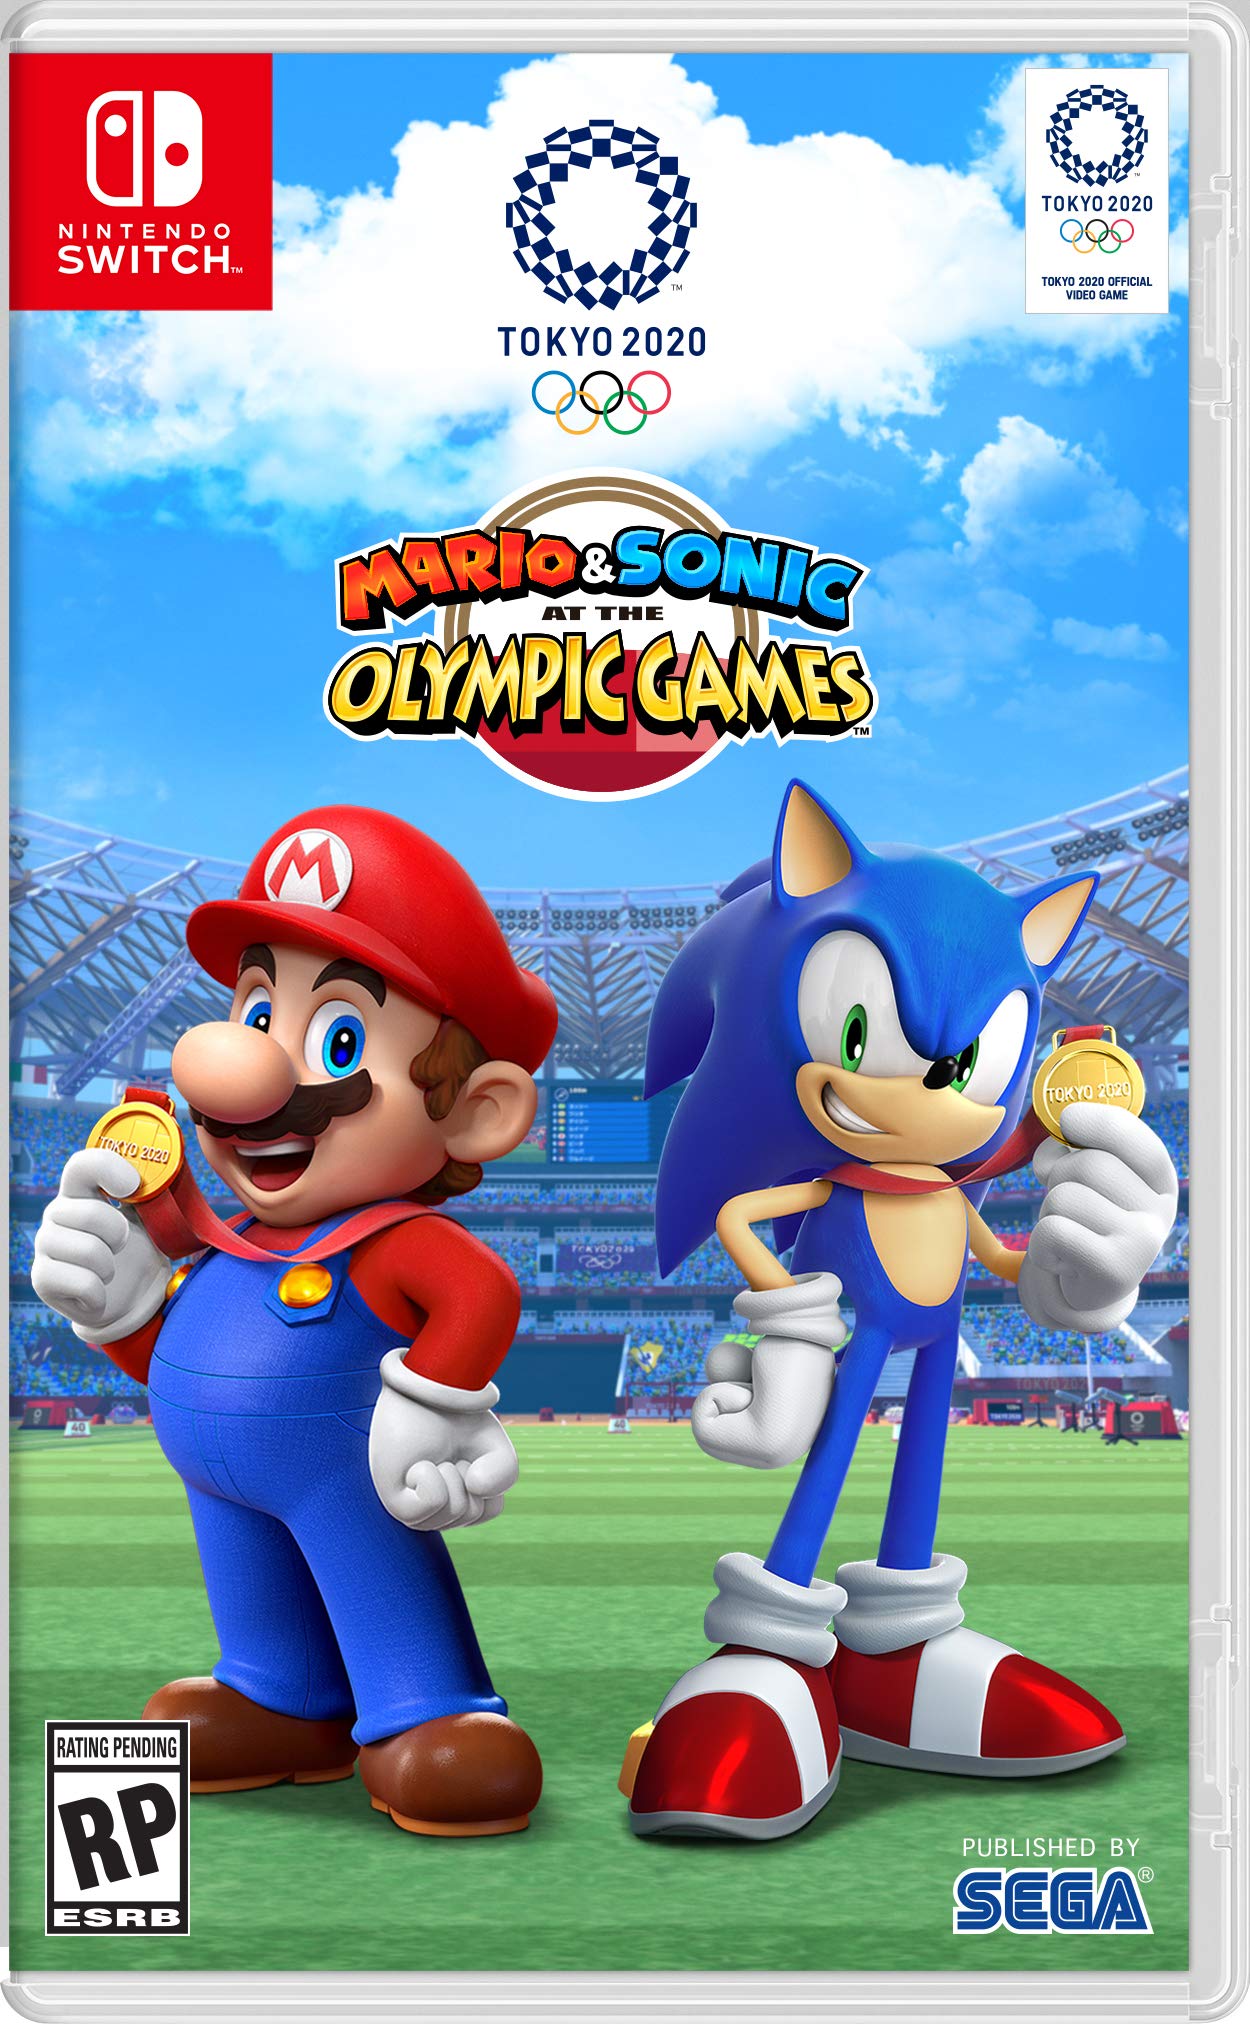 What Sports Are In Mario And Sonic At The Olympic Games 2020